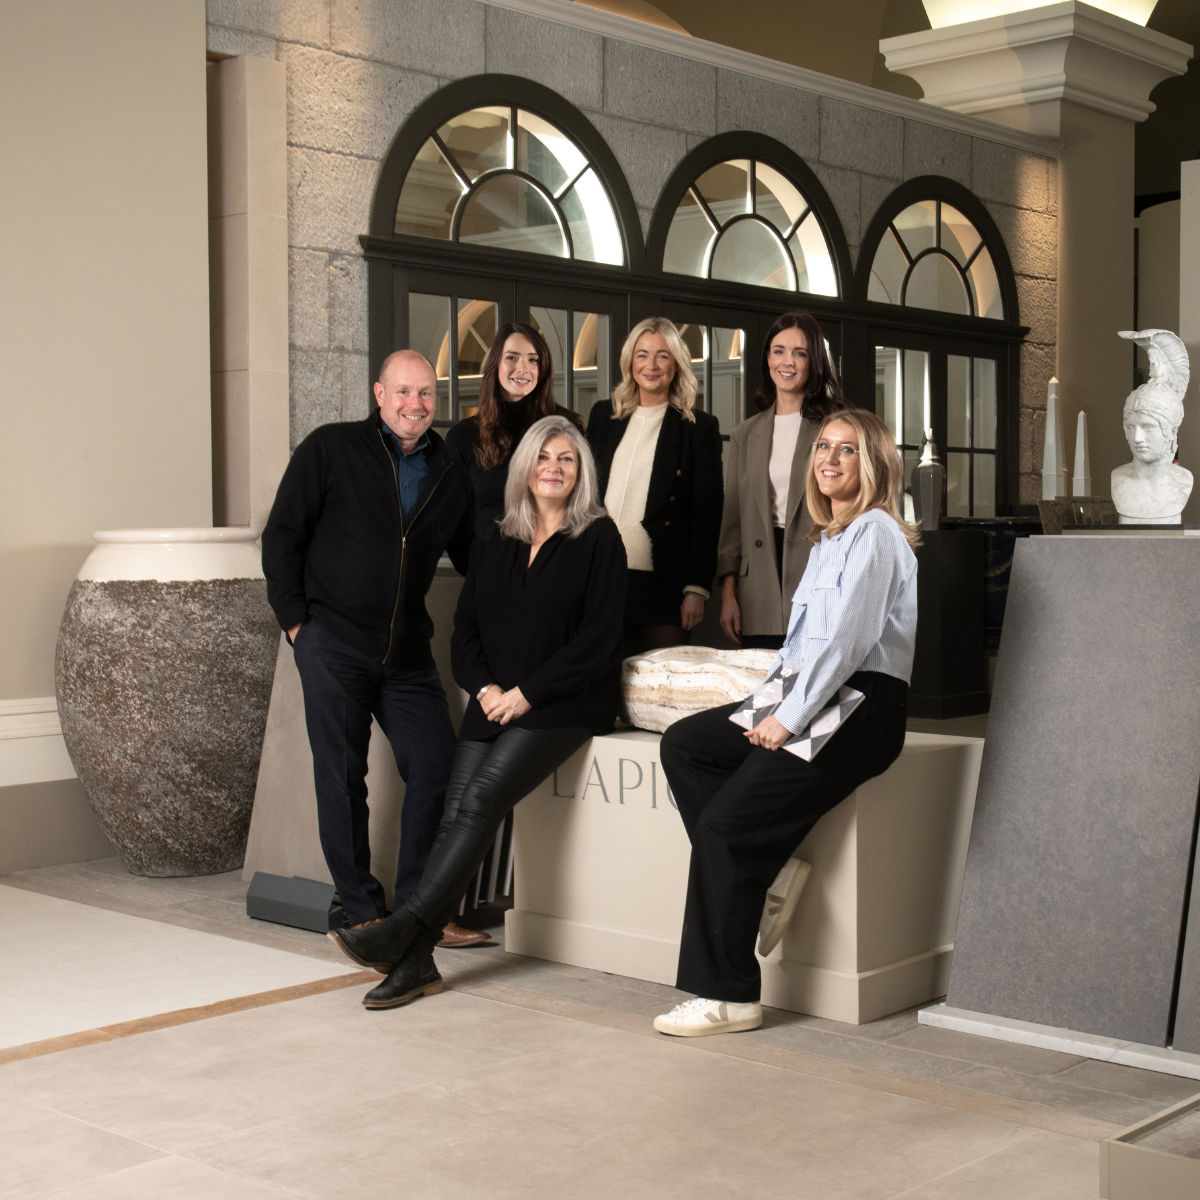 Meet the team of Project Consultants at Lapicida's showroom in Yorkshire